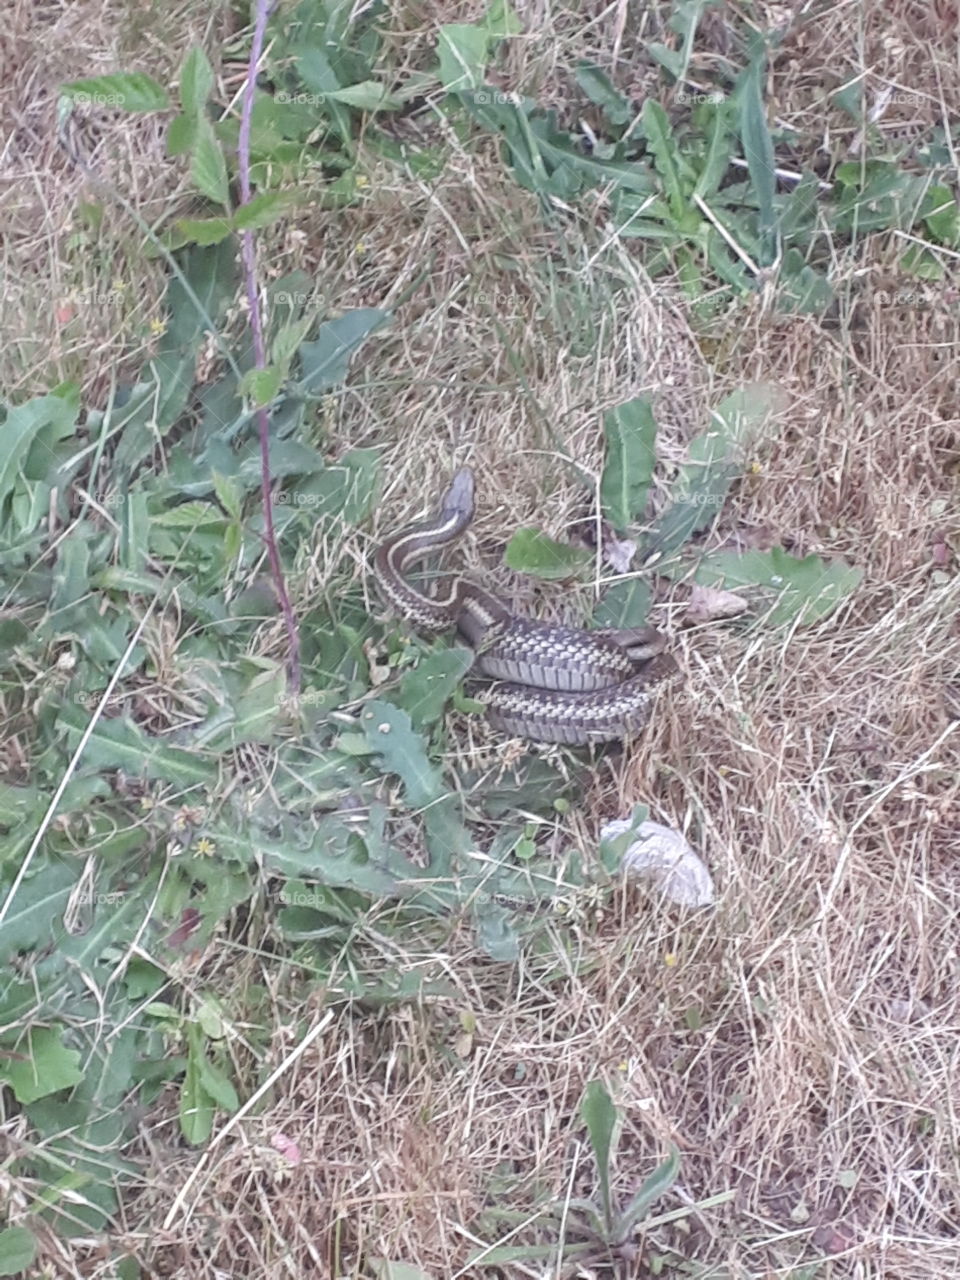 Dry summer grass on Vancouver Island is not the best camouflage for this garter snake